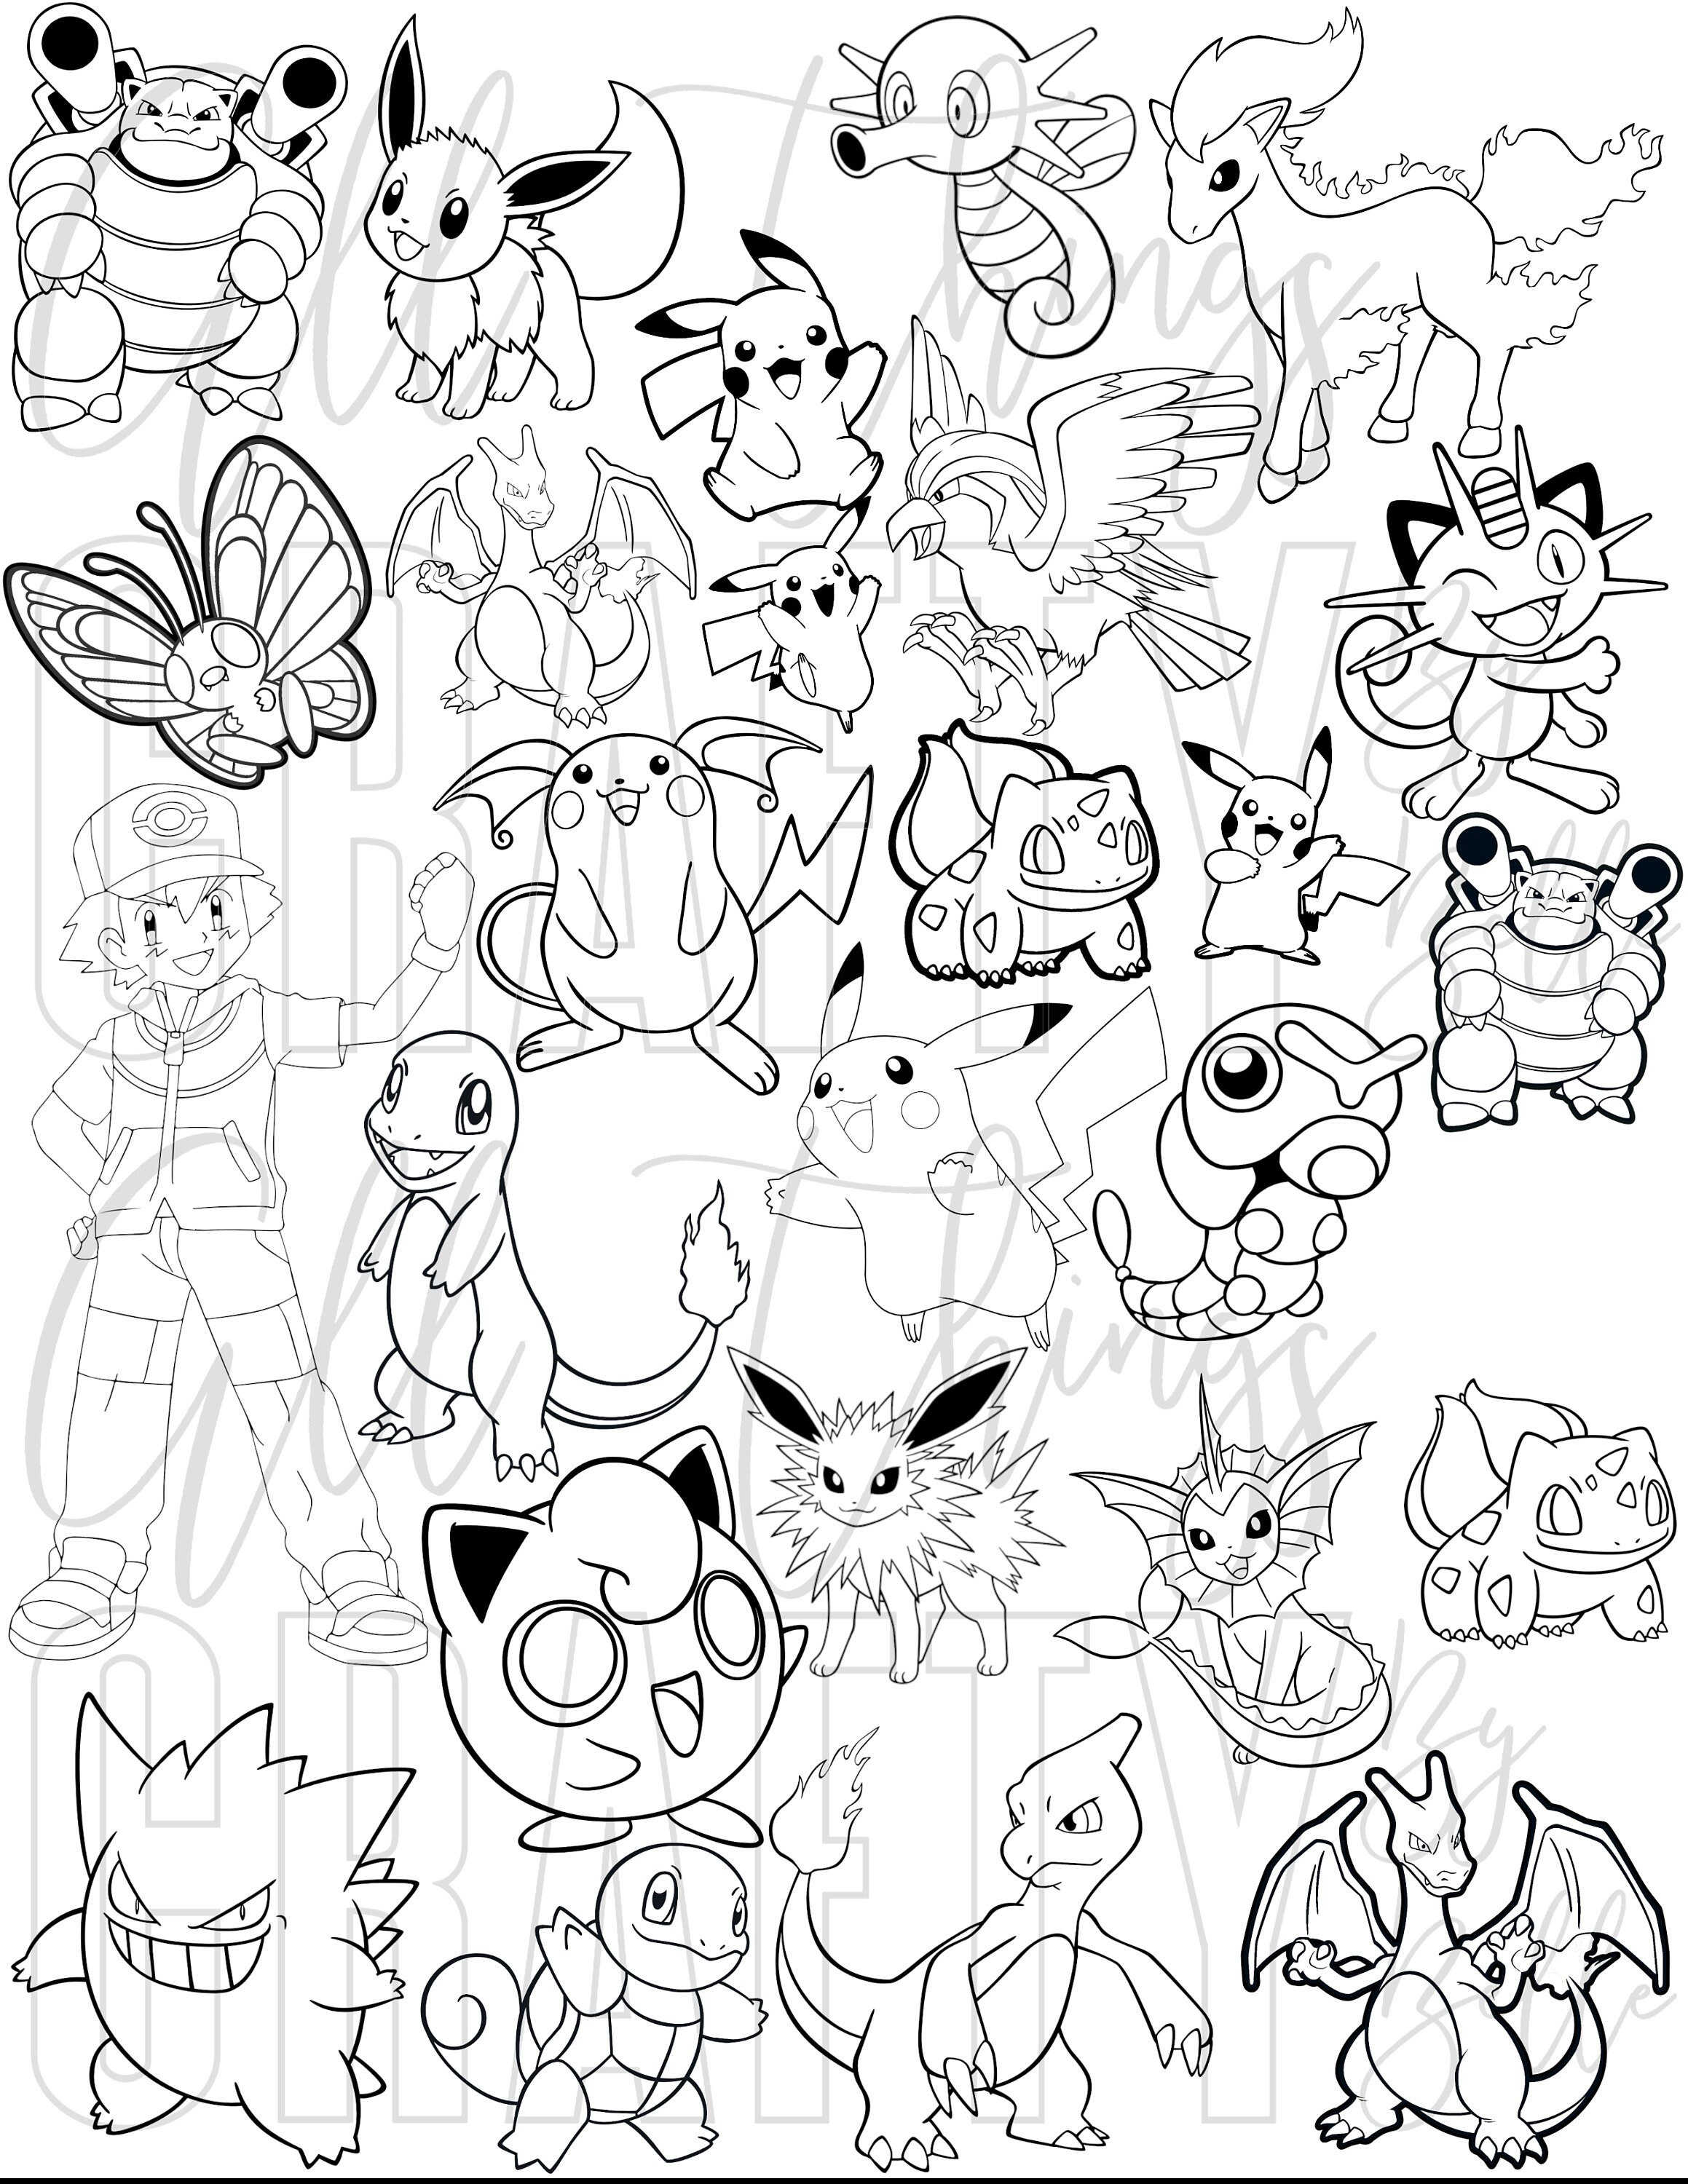 Pokemon coloring sheets digital pdf coloring pages